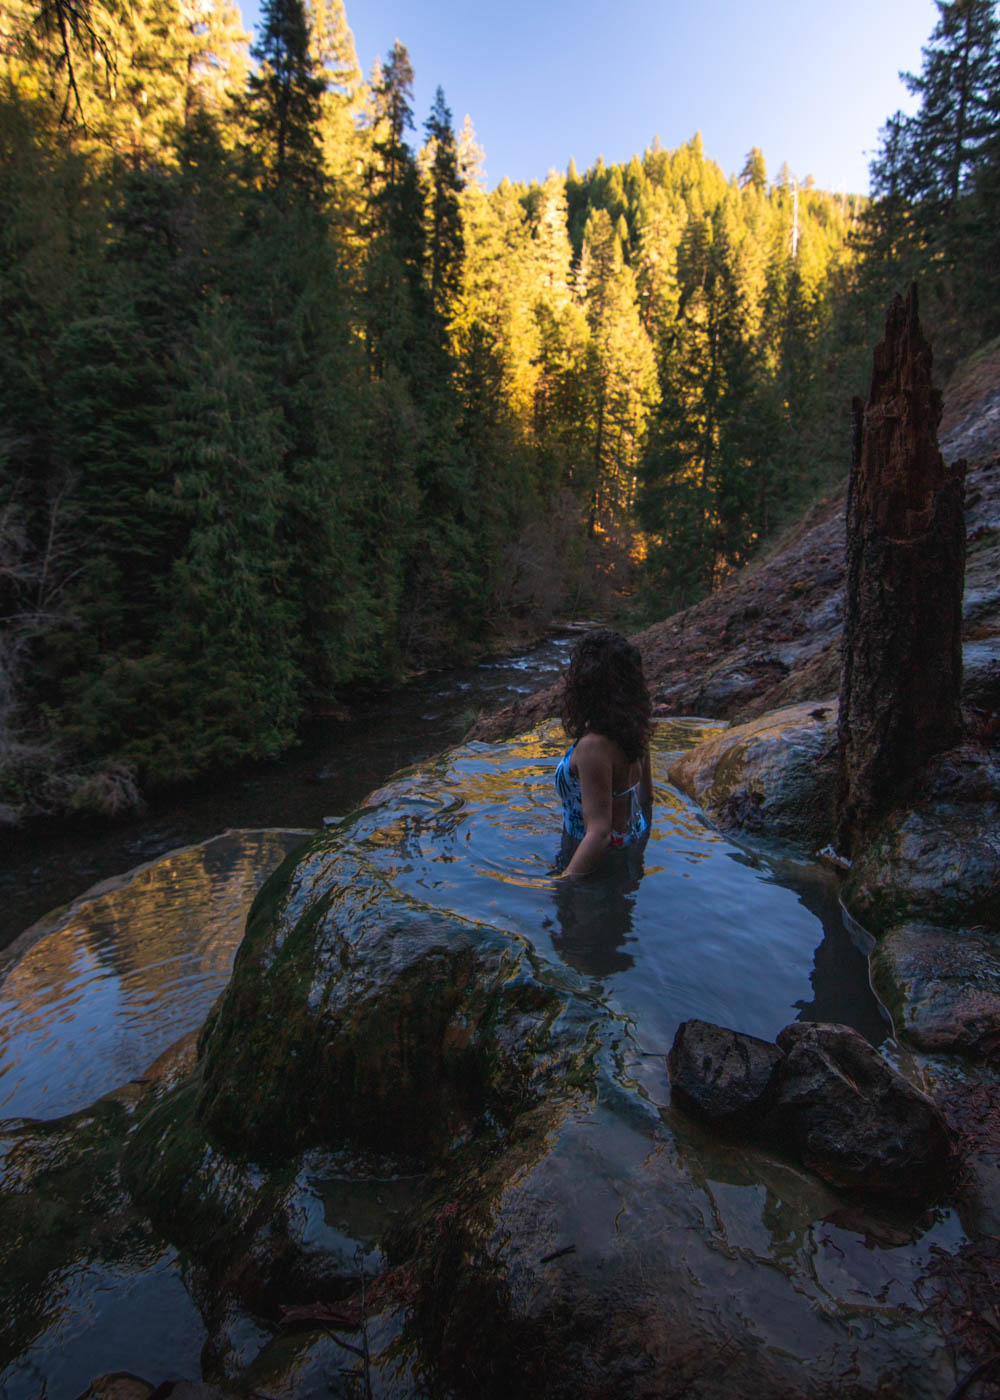 Nina relaxing in Umpqua Hot Springs at golden hour in the forest.